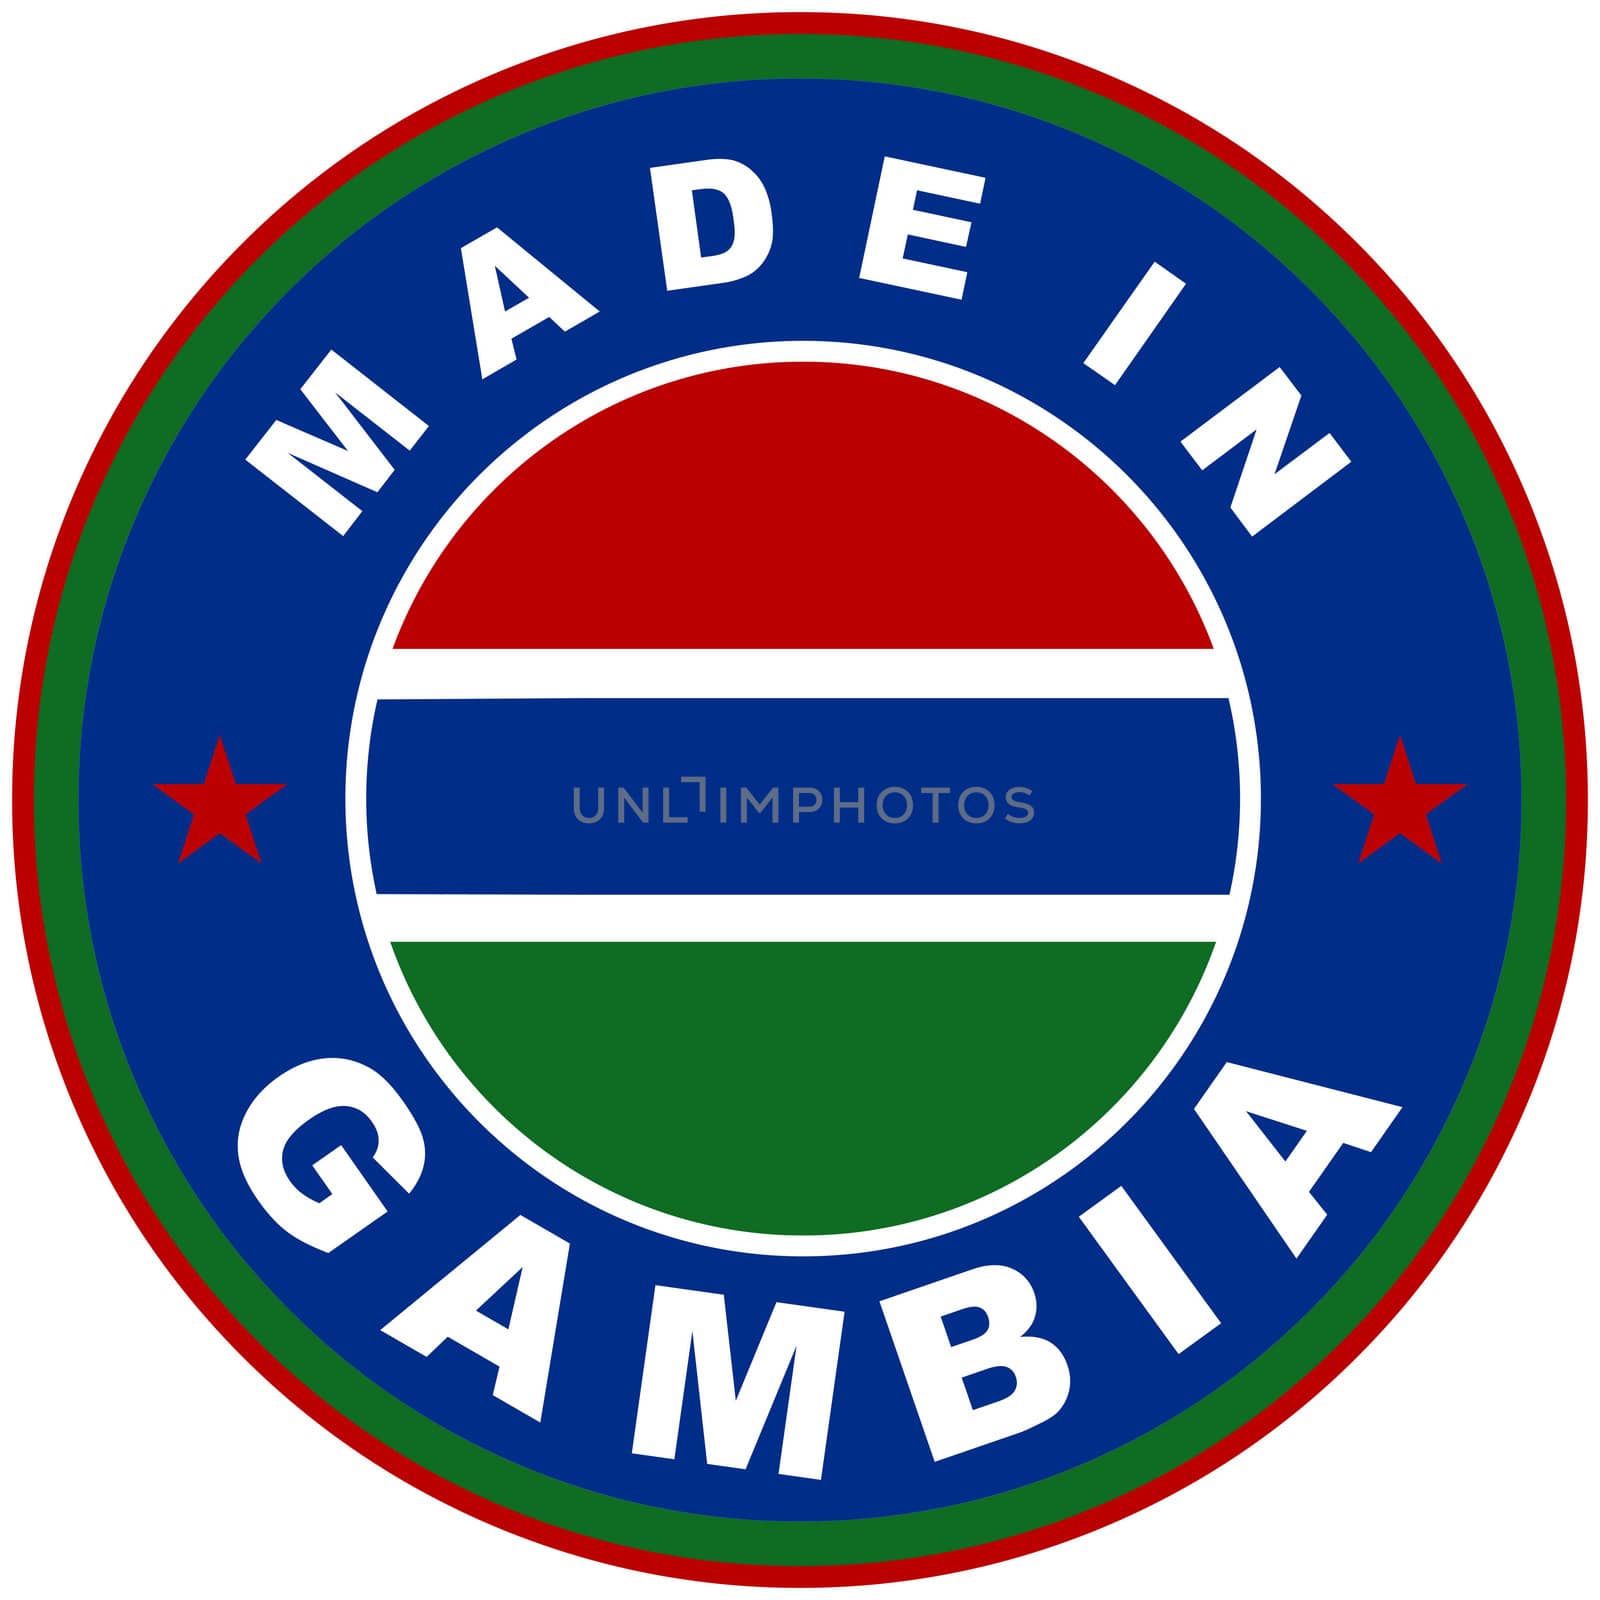 made in gambia by tony4urban